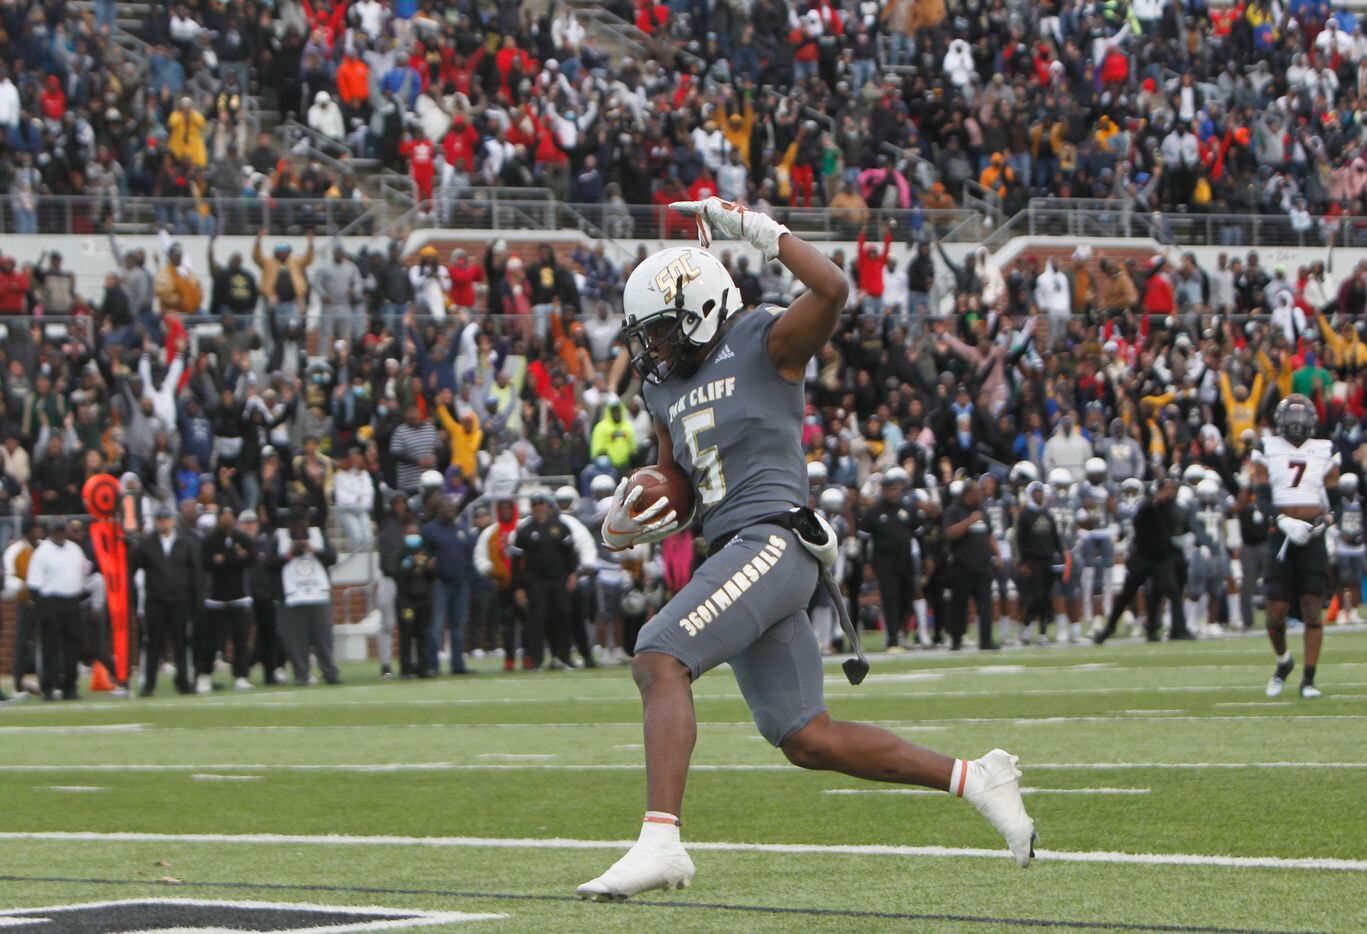 South Oak Cliff receiver Randy Reece (5) ignites Golden Bears fans as he breaks away for a game winning reception during the 4th quarter of play against Aledo. South Oak Cliff won 33-28 to advance. The two teams played their Class 5A Division ll Region ll semifinal football game at Vernon Newsom Stadium in Mansfield on November 26, 2021. (Steve Hamm/ Special Contributor)